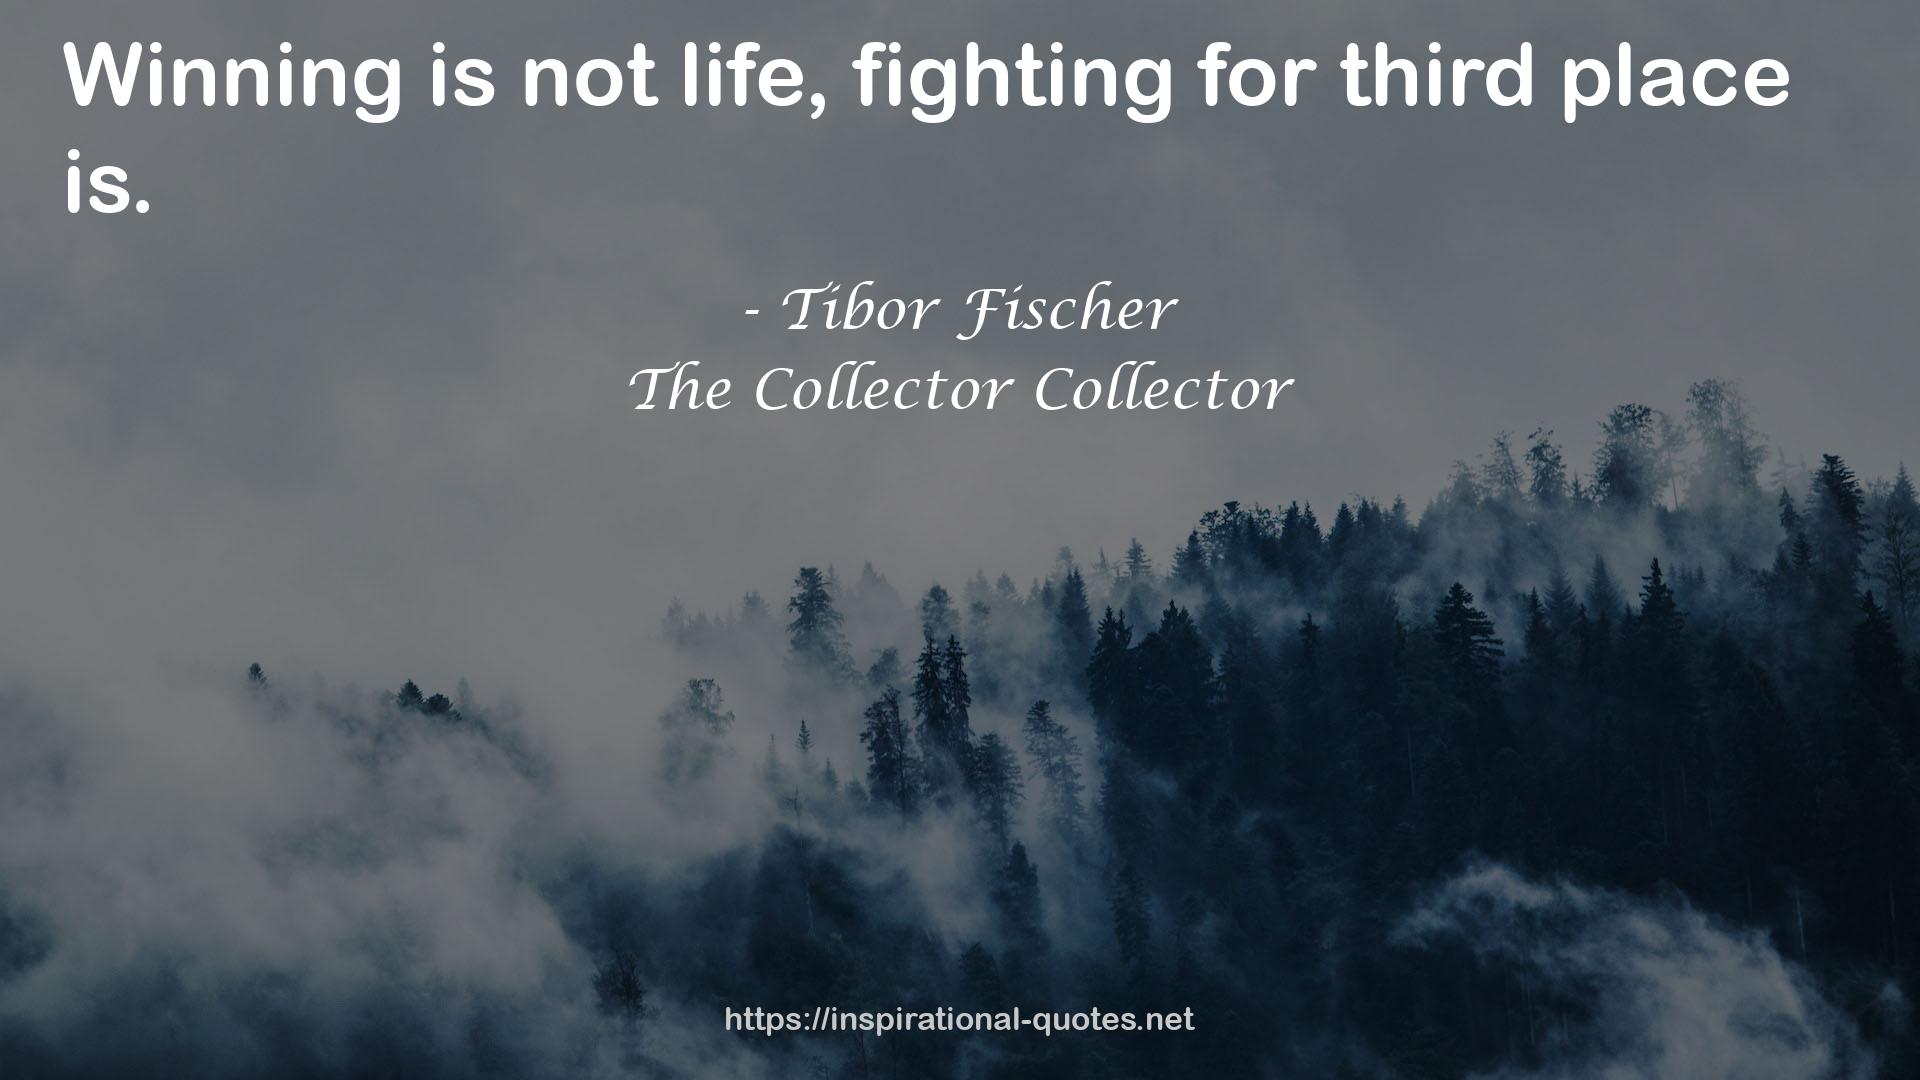 The Collector Collector QUOTES